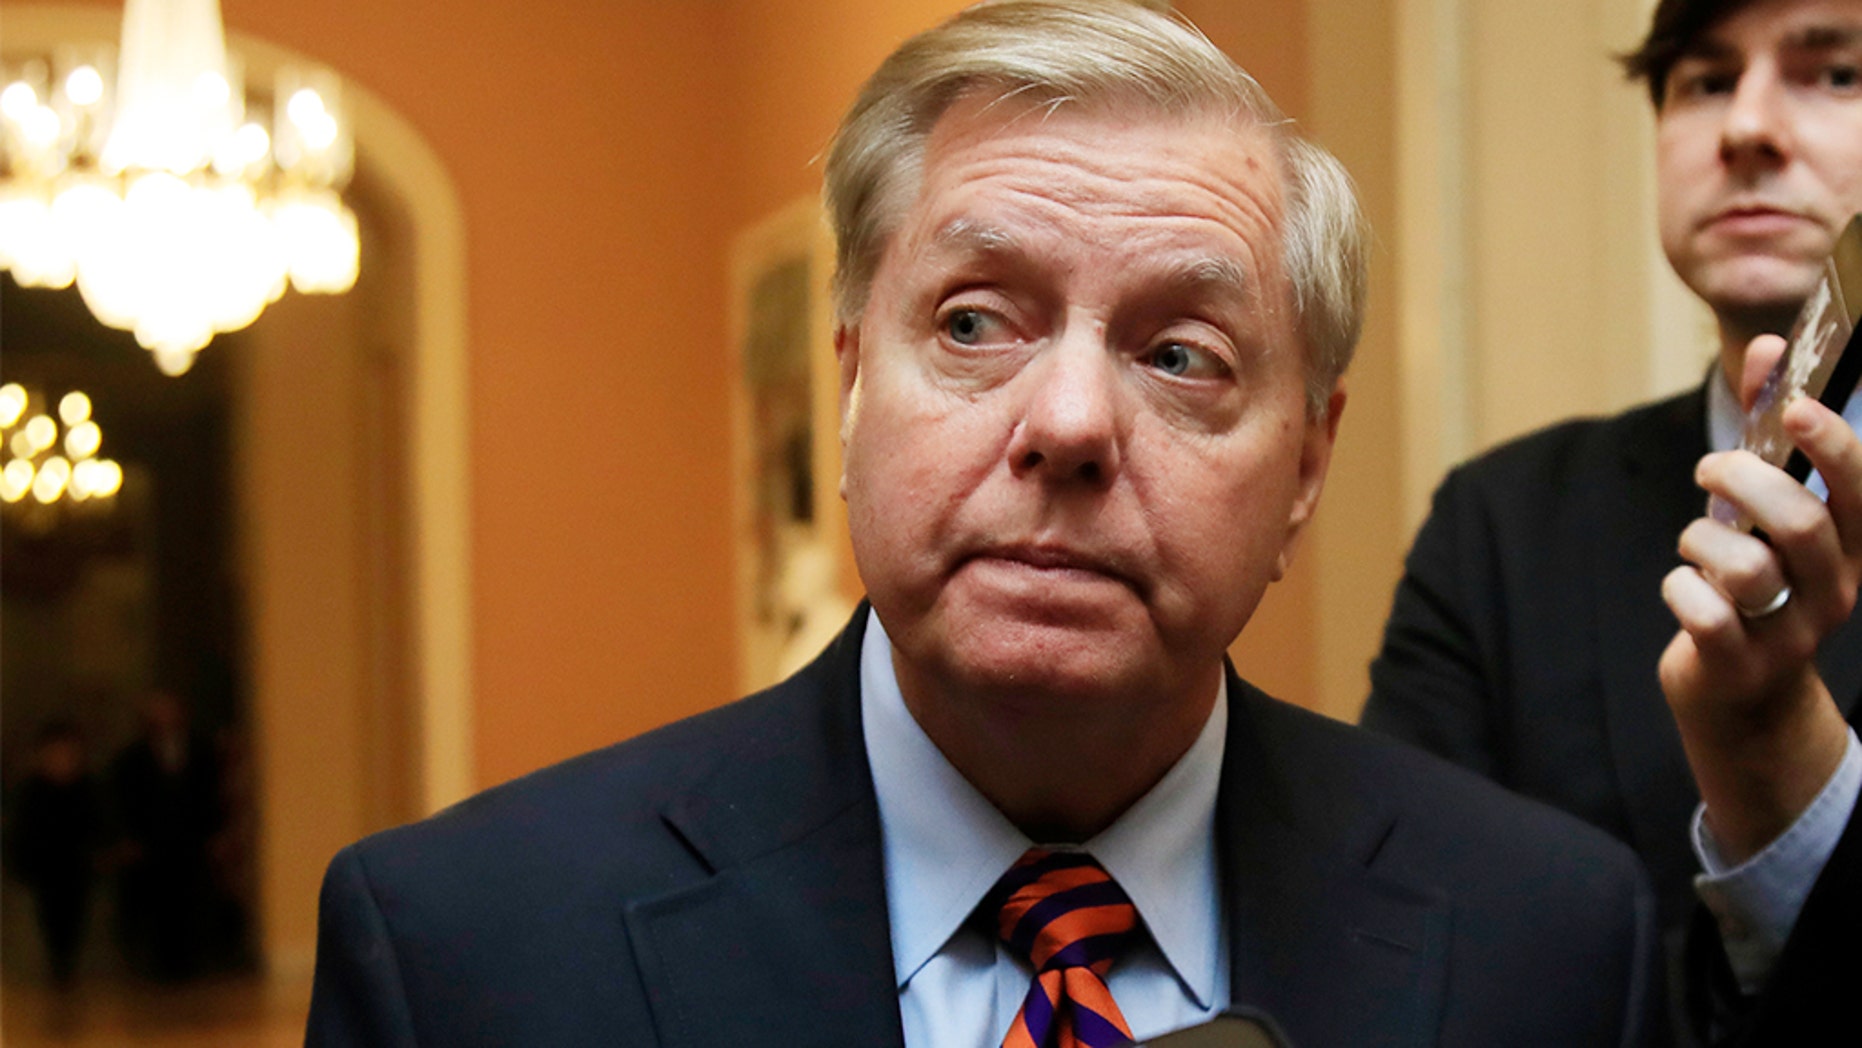 Sen. Lindsey Graham, R-S.C., was elected Wednesday to fulfill the role of chairman of the Senate Judiciary Committee.